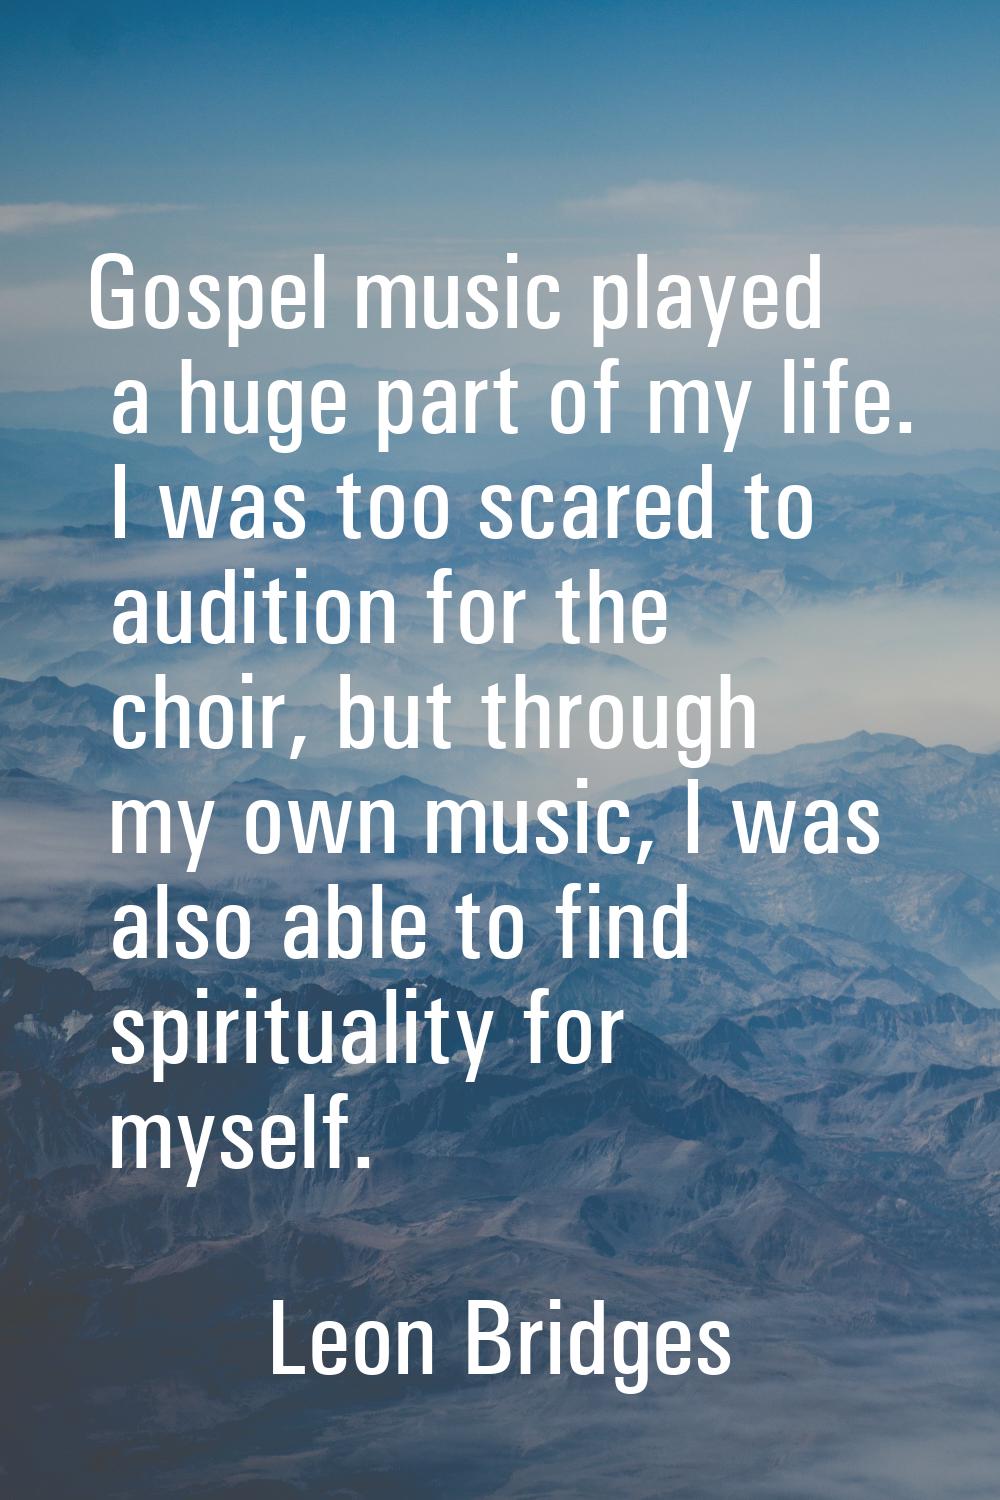 Gospel music played a huge part of my life. I was too scared to audition for the choir, but through